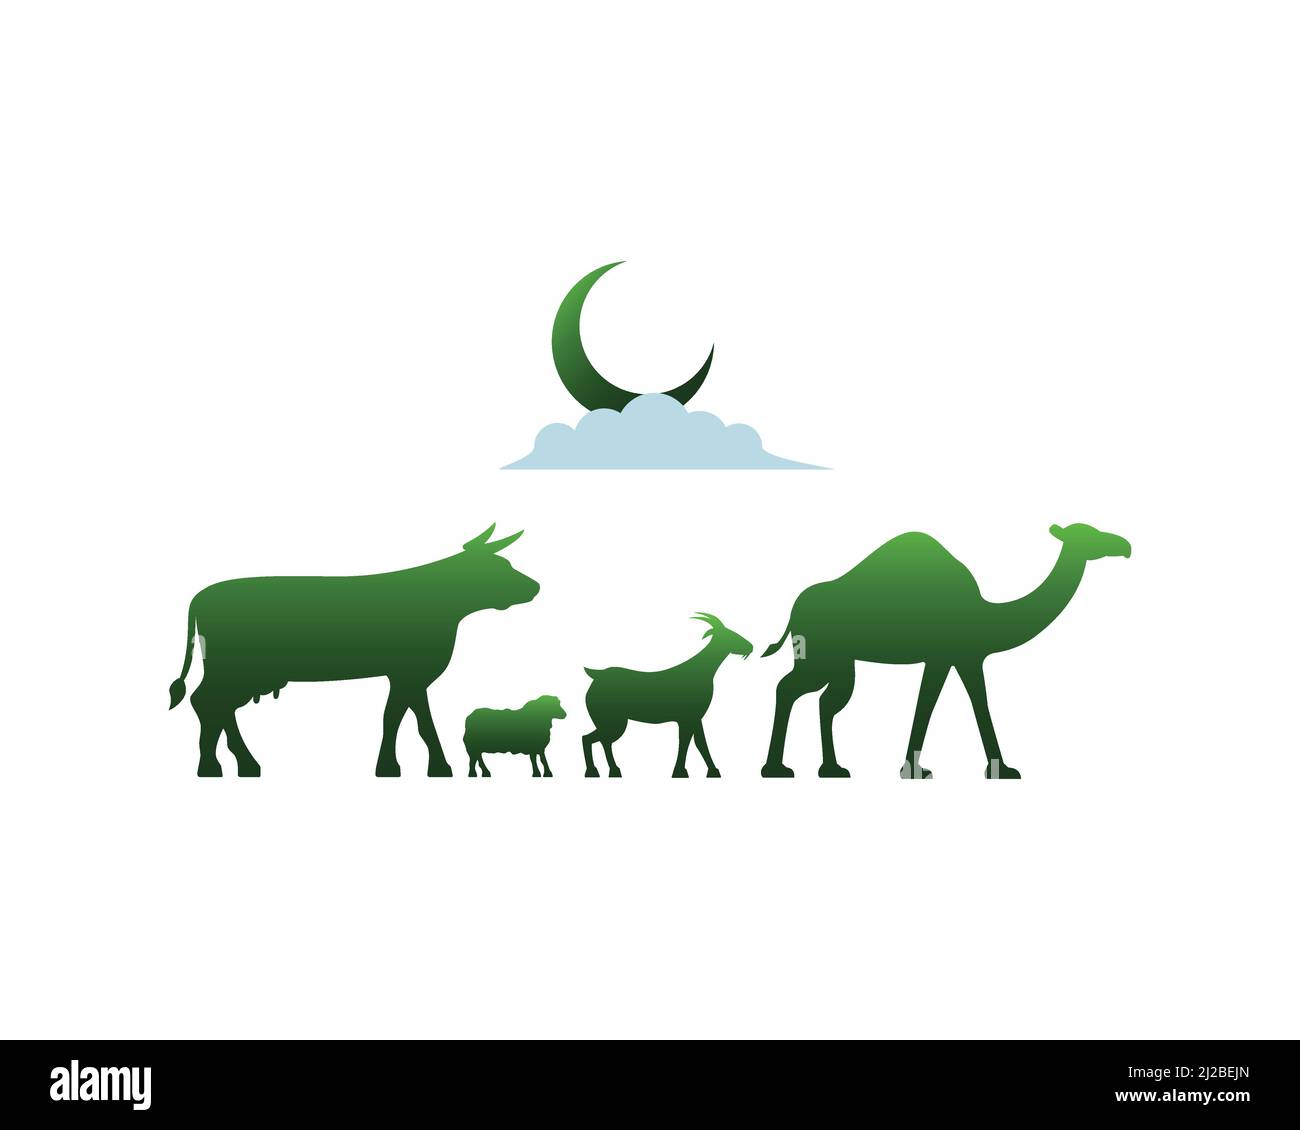 Cow, Sheep, Goat and Camel Walking Together as a Symbol of Eid Al Adha Stock Vector